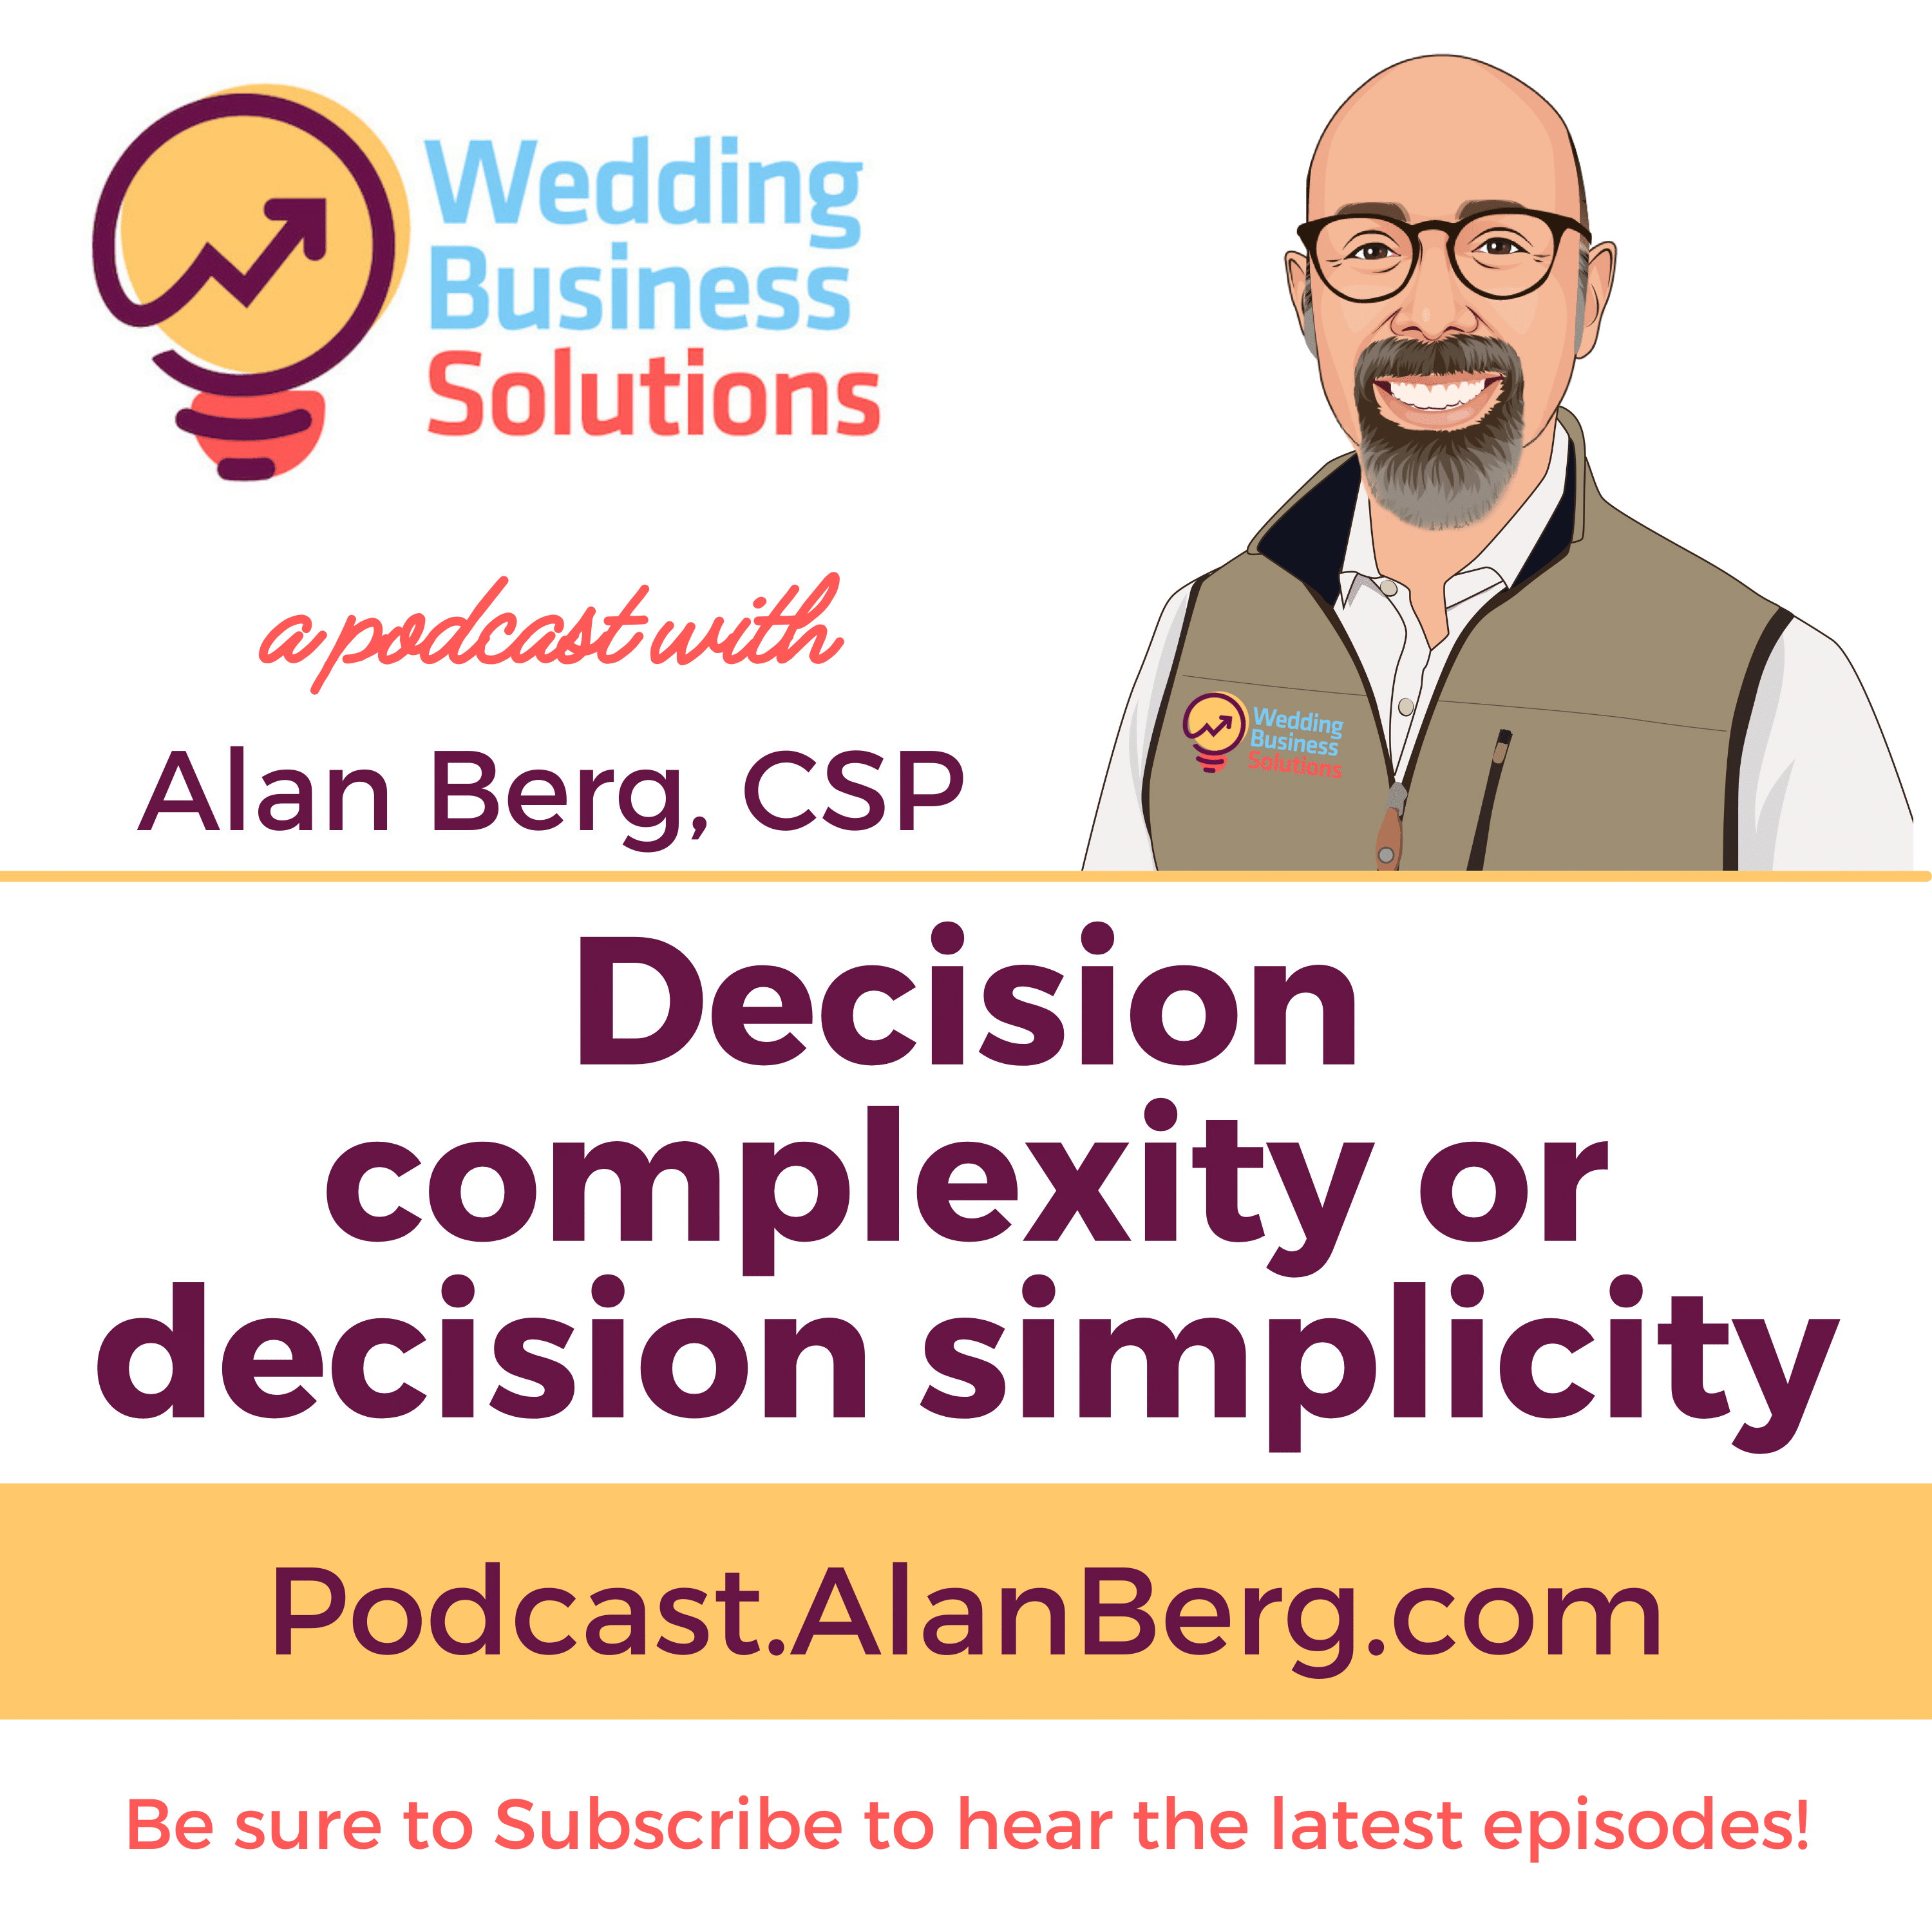 Decision complexity or decision simplicity? - Alan Berg CSP, Wedding Business Solutions Podcast